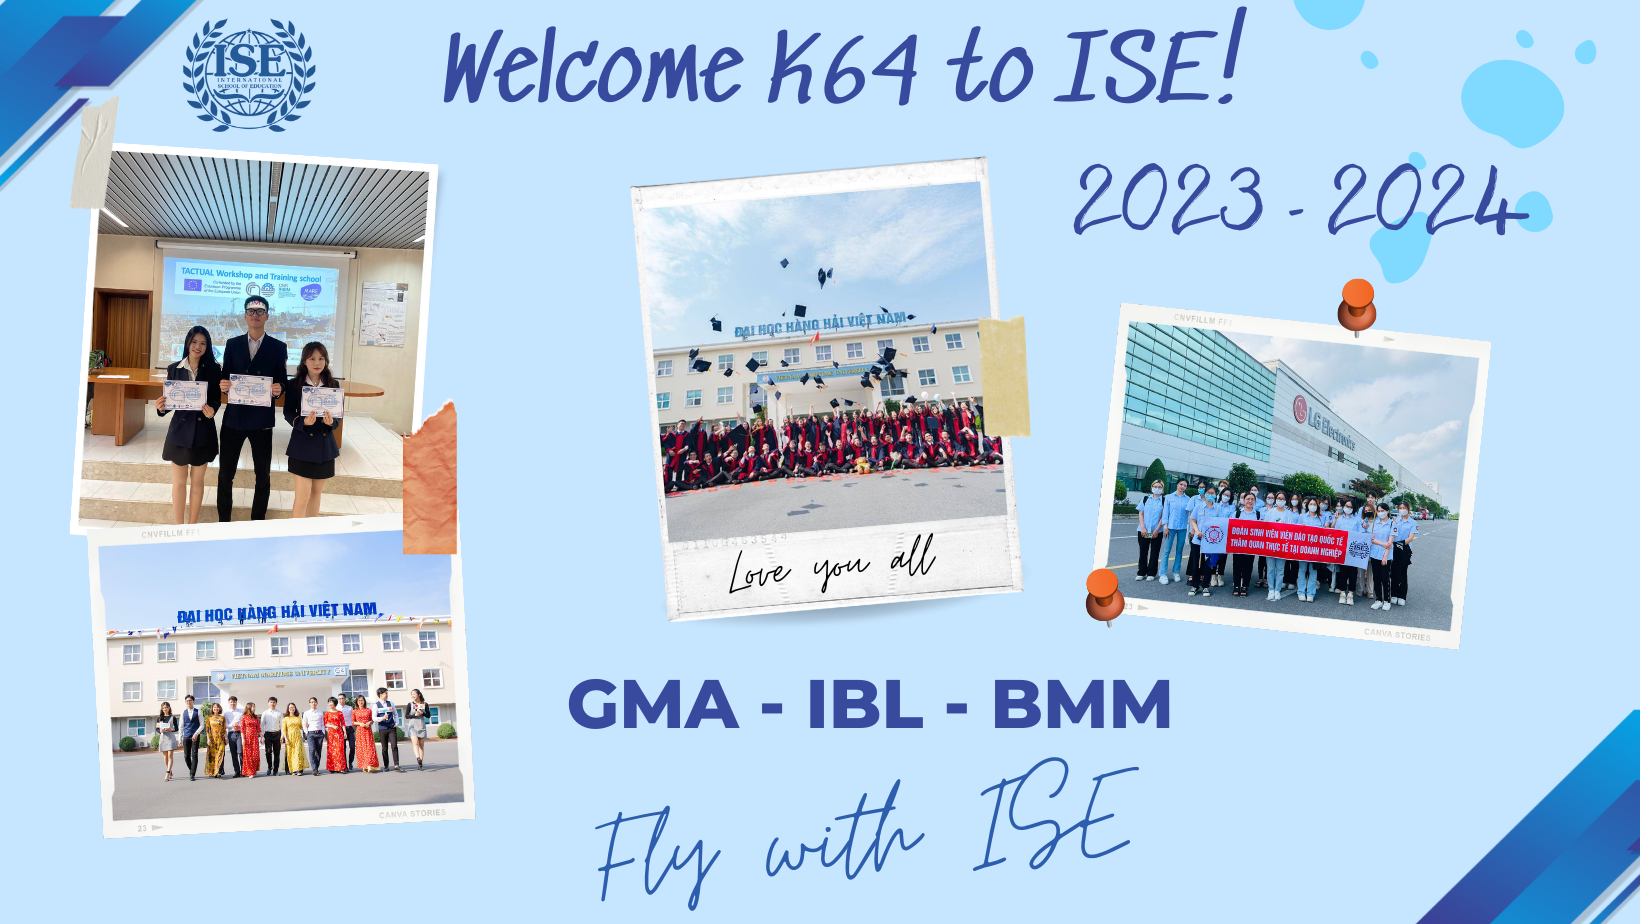 Welcome to ISE 23-24